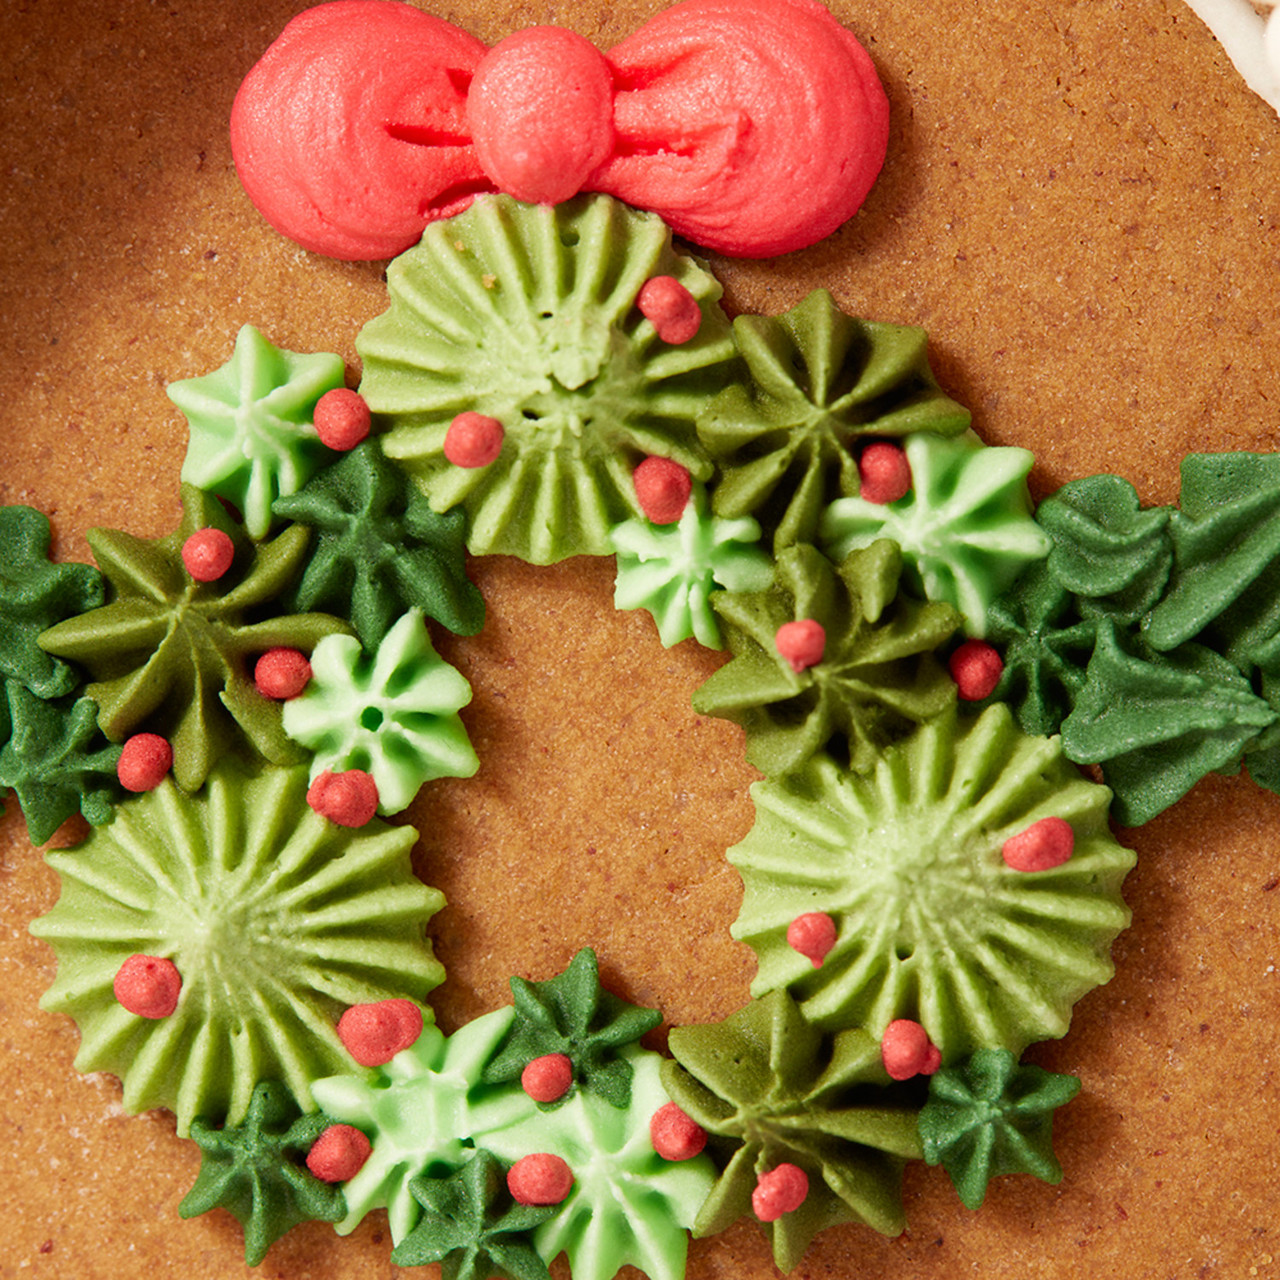 How to Pipe a Star Buttercream Wreath - Wilton